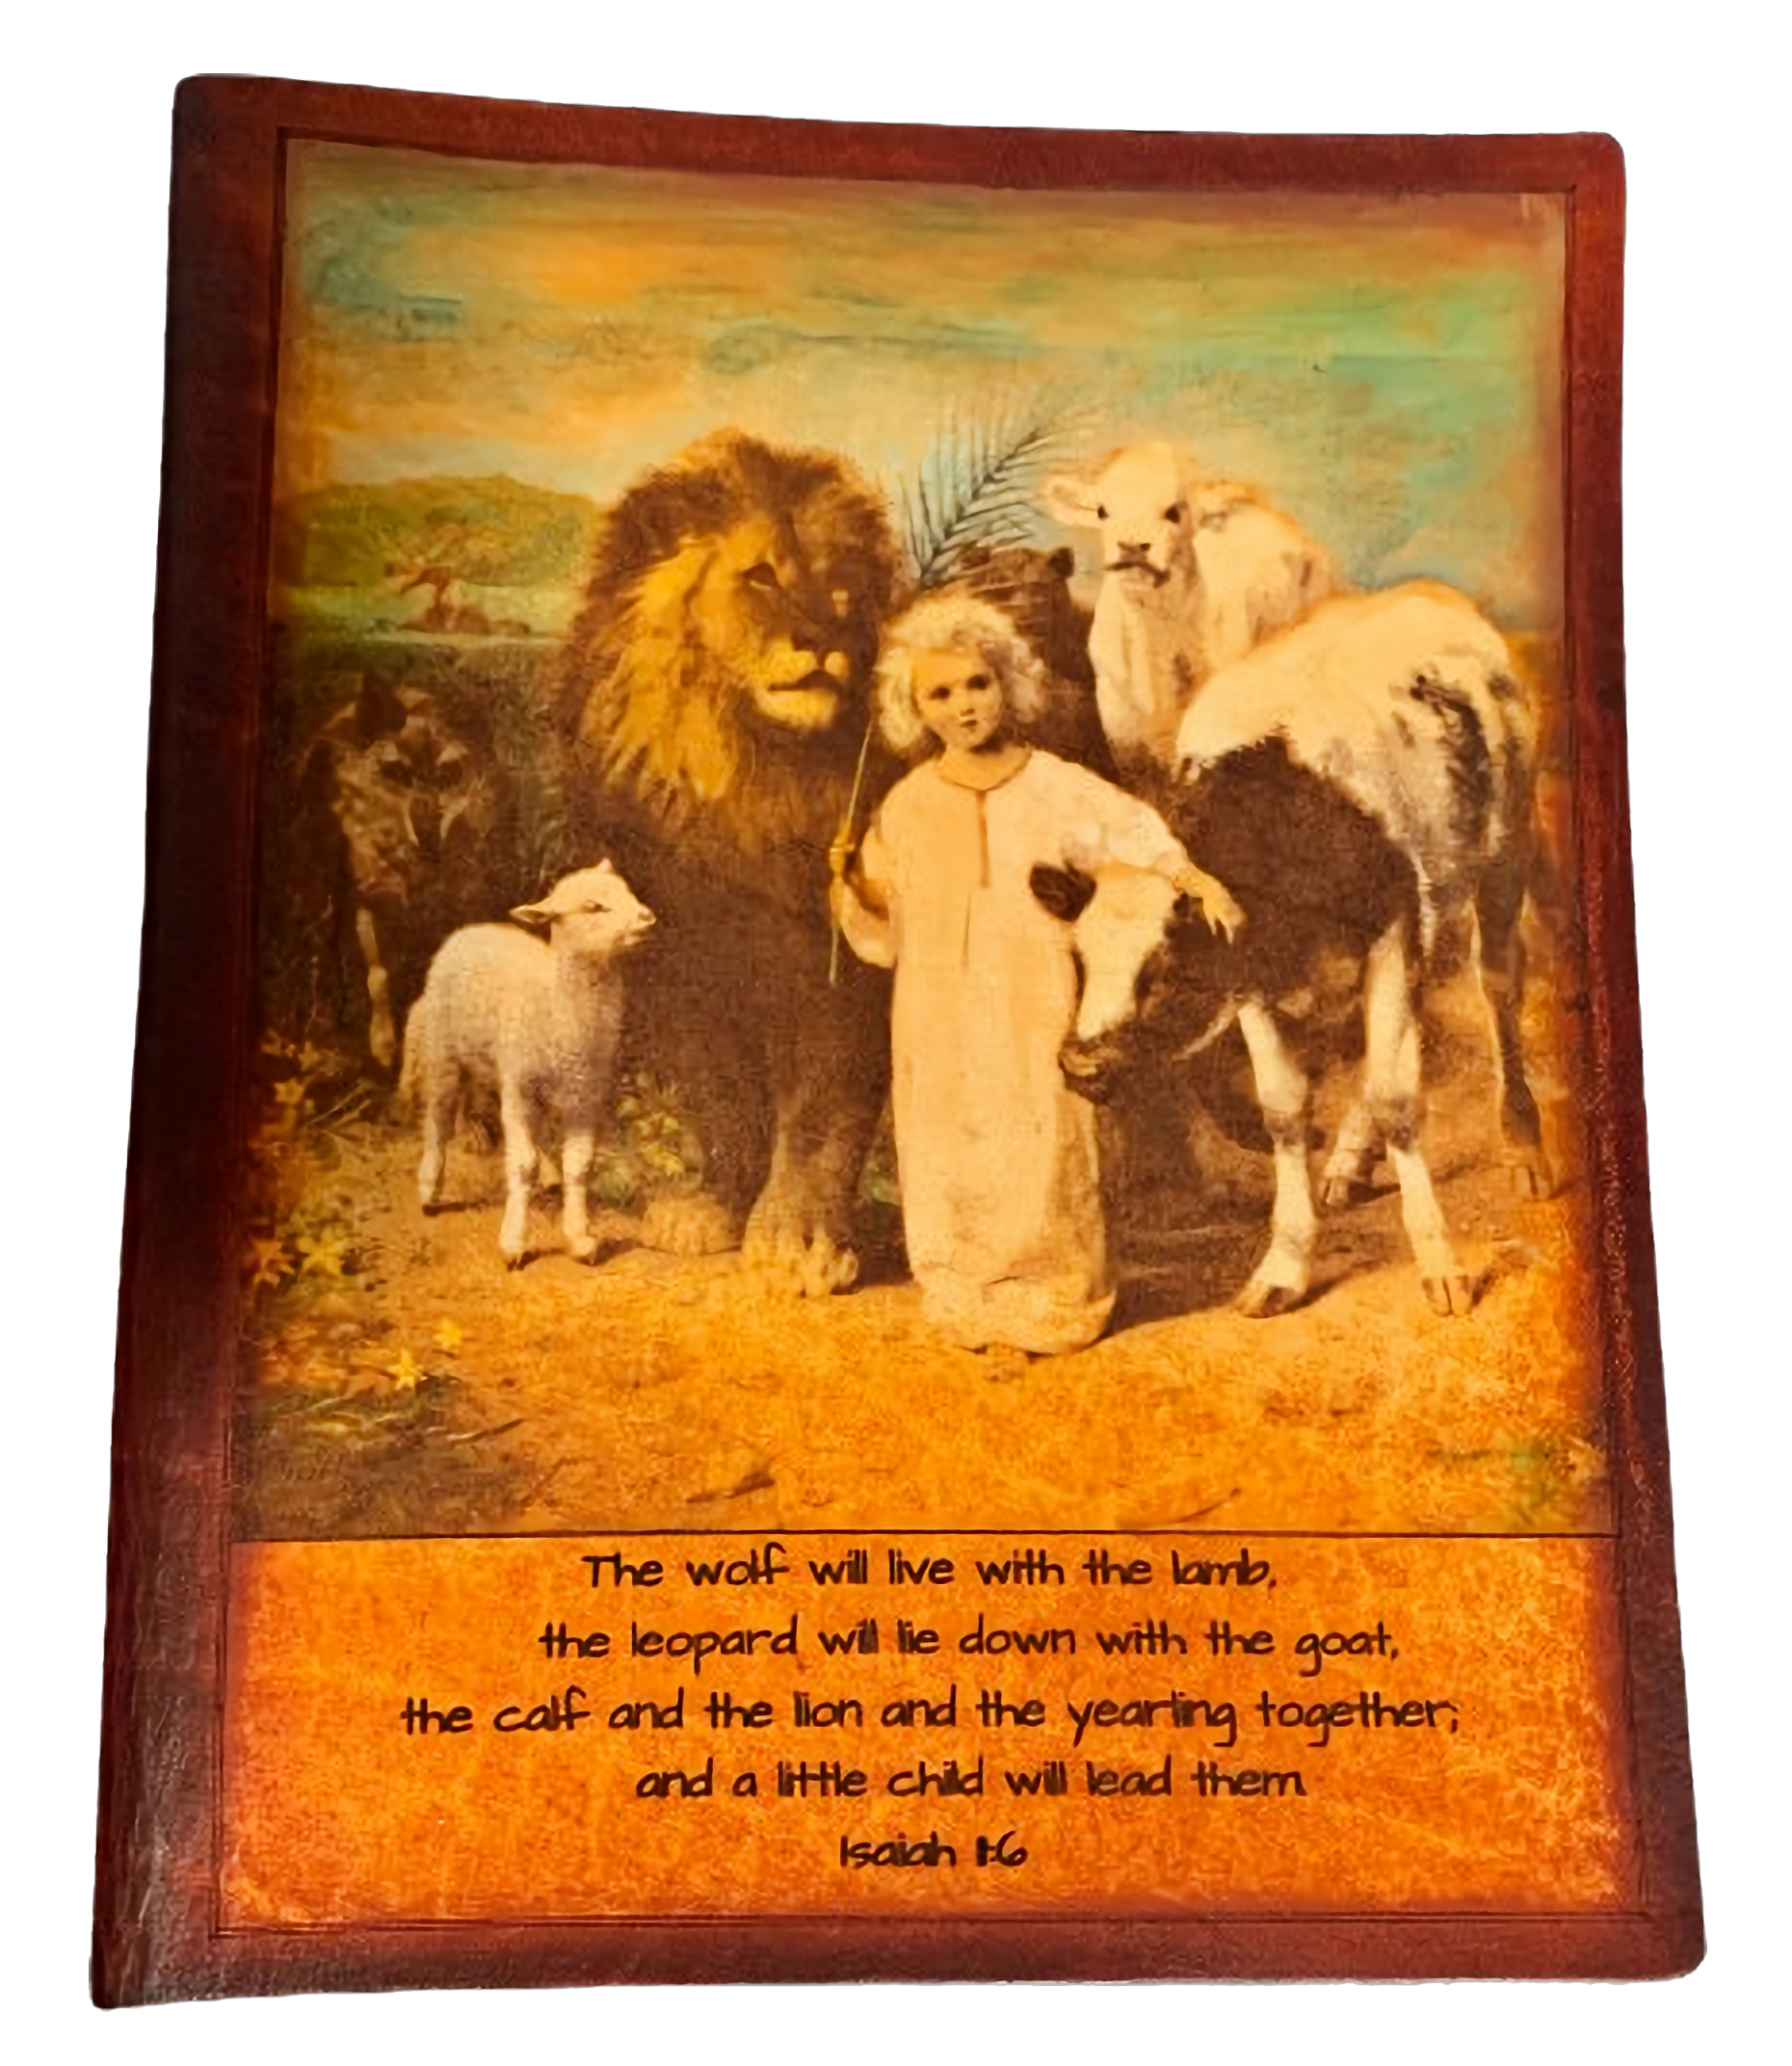 A custom leather bible with a hand-tinted photo engraved - an image of a child with a cow, lion, lamb, and wolf. A verse that reads: The wolf will live with the lamb, the leopard will lie down with the goat, the calf and the lion and the yearling together, and a little child will lead them. Isaiah 1:6